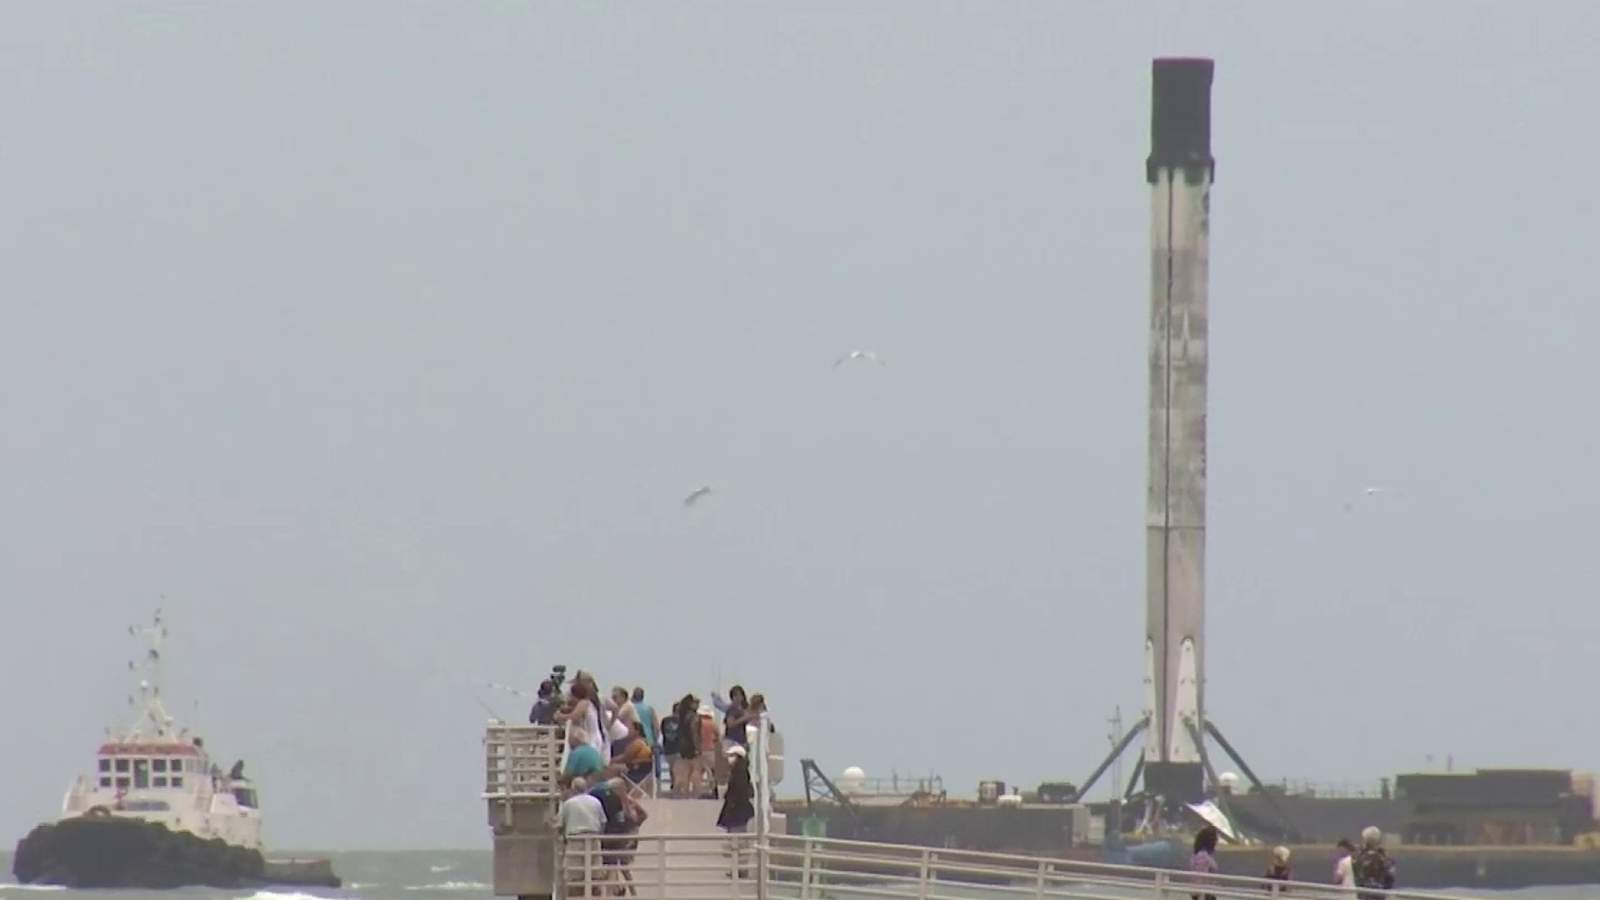 Falcon 9 booster used to launch NASA astronauts arrives at Port Canaveral